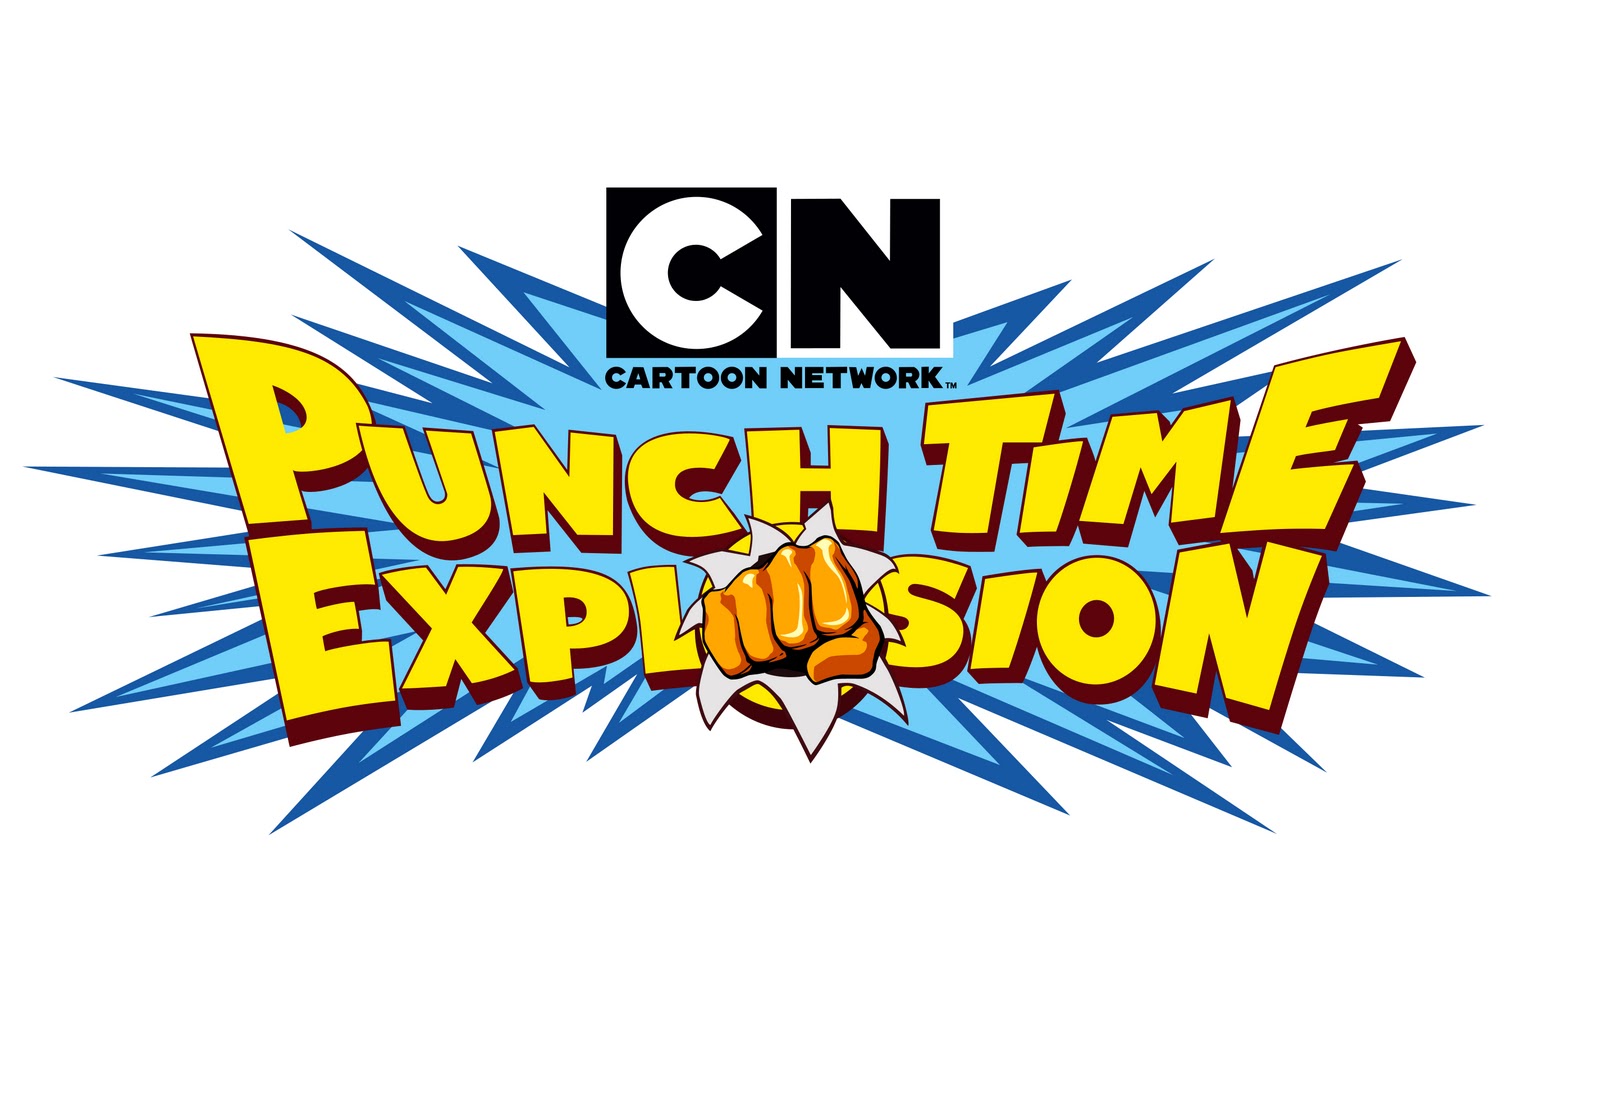 Cartoon Network: Punch Time Explosion - Wikipedia